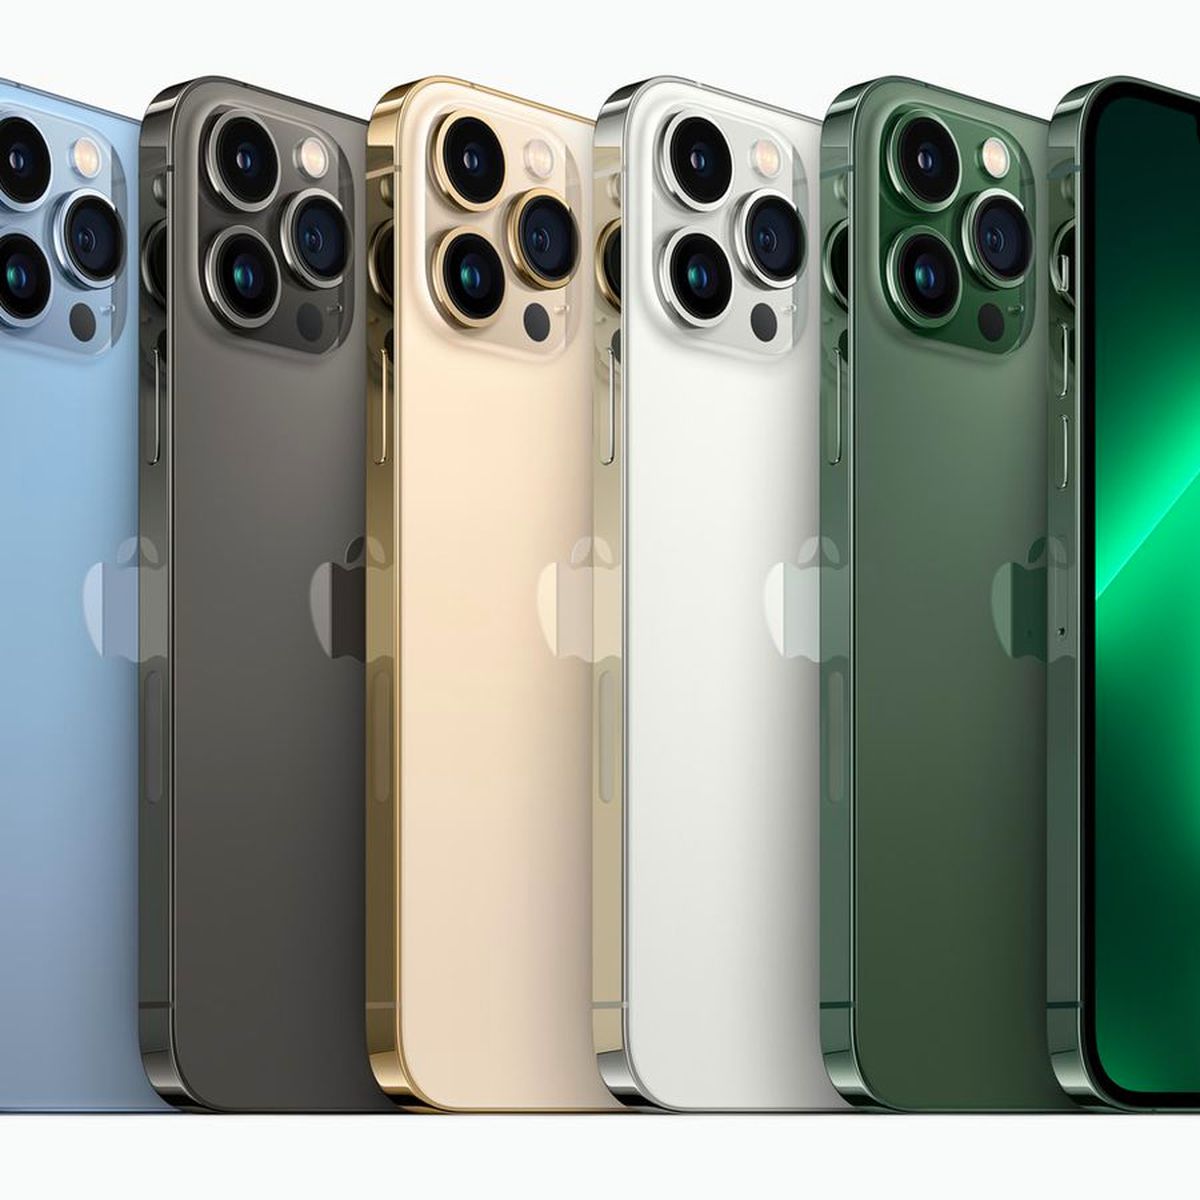 Apple announces new green iPhone 13 and alpine green iPhone 13 Pro,  available for pre-order this Friday - 9to5Mac